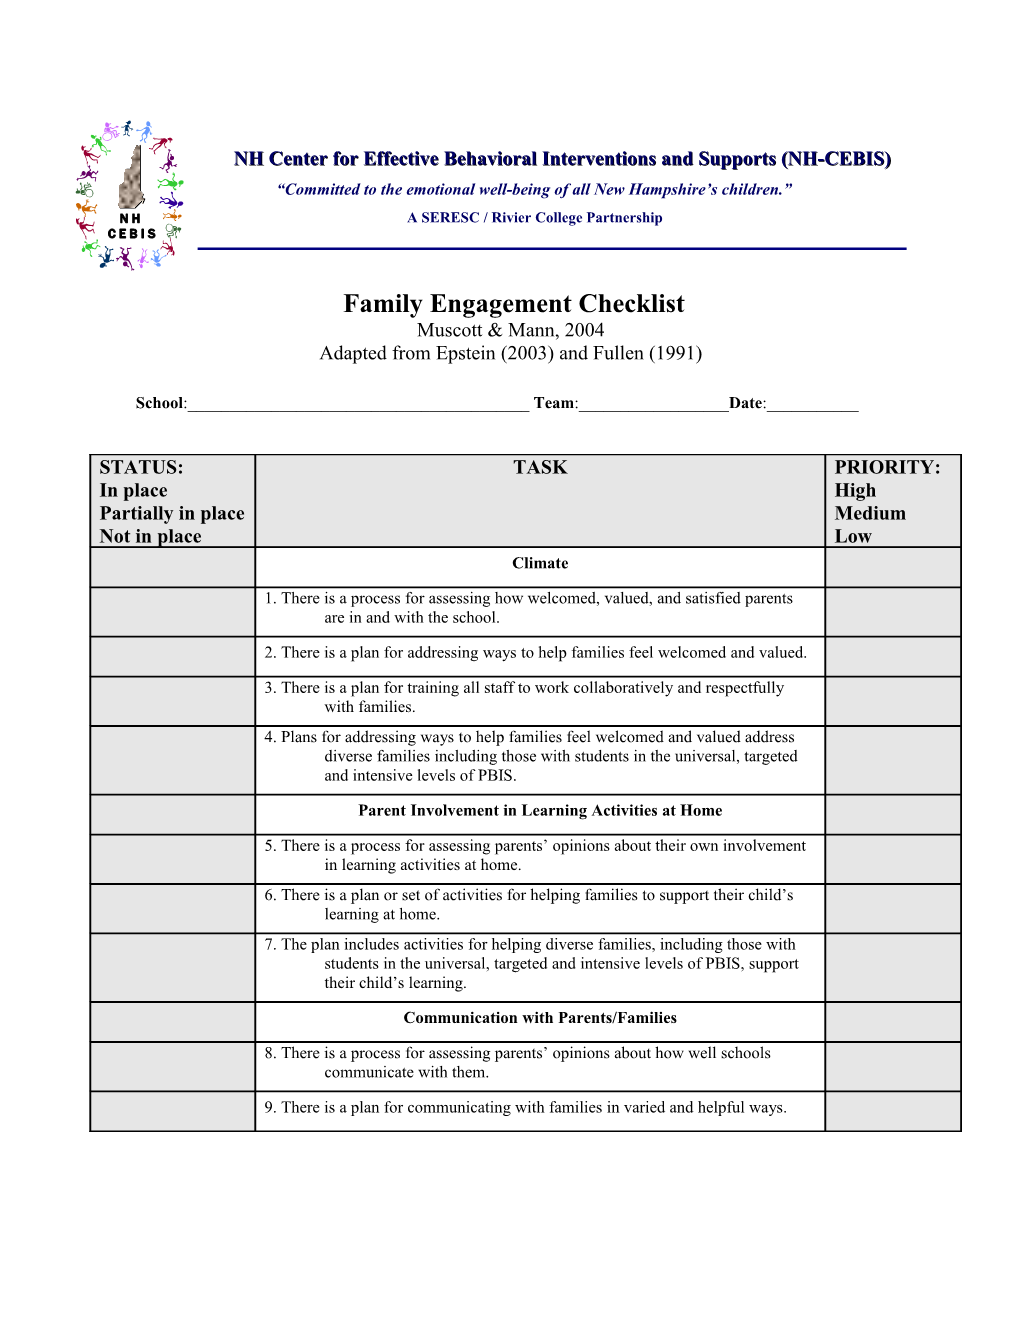 NH Center for Effective Behavioral Interventions and Supports (NH-CEBIS)